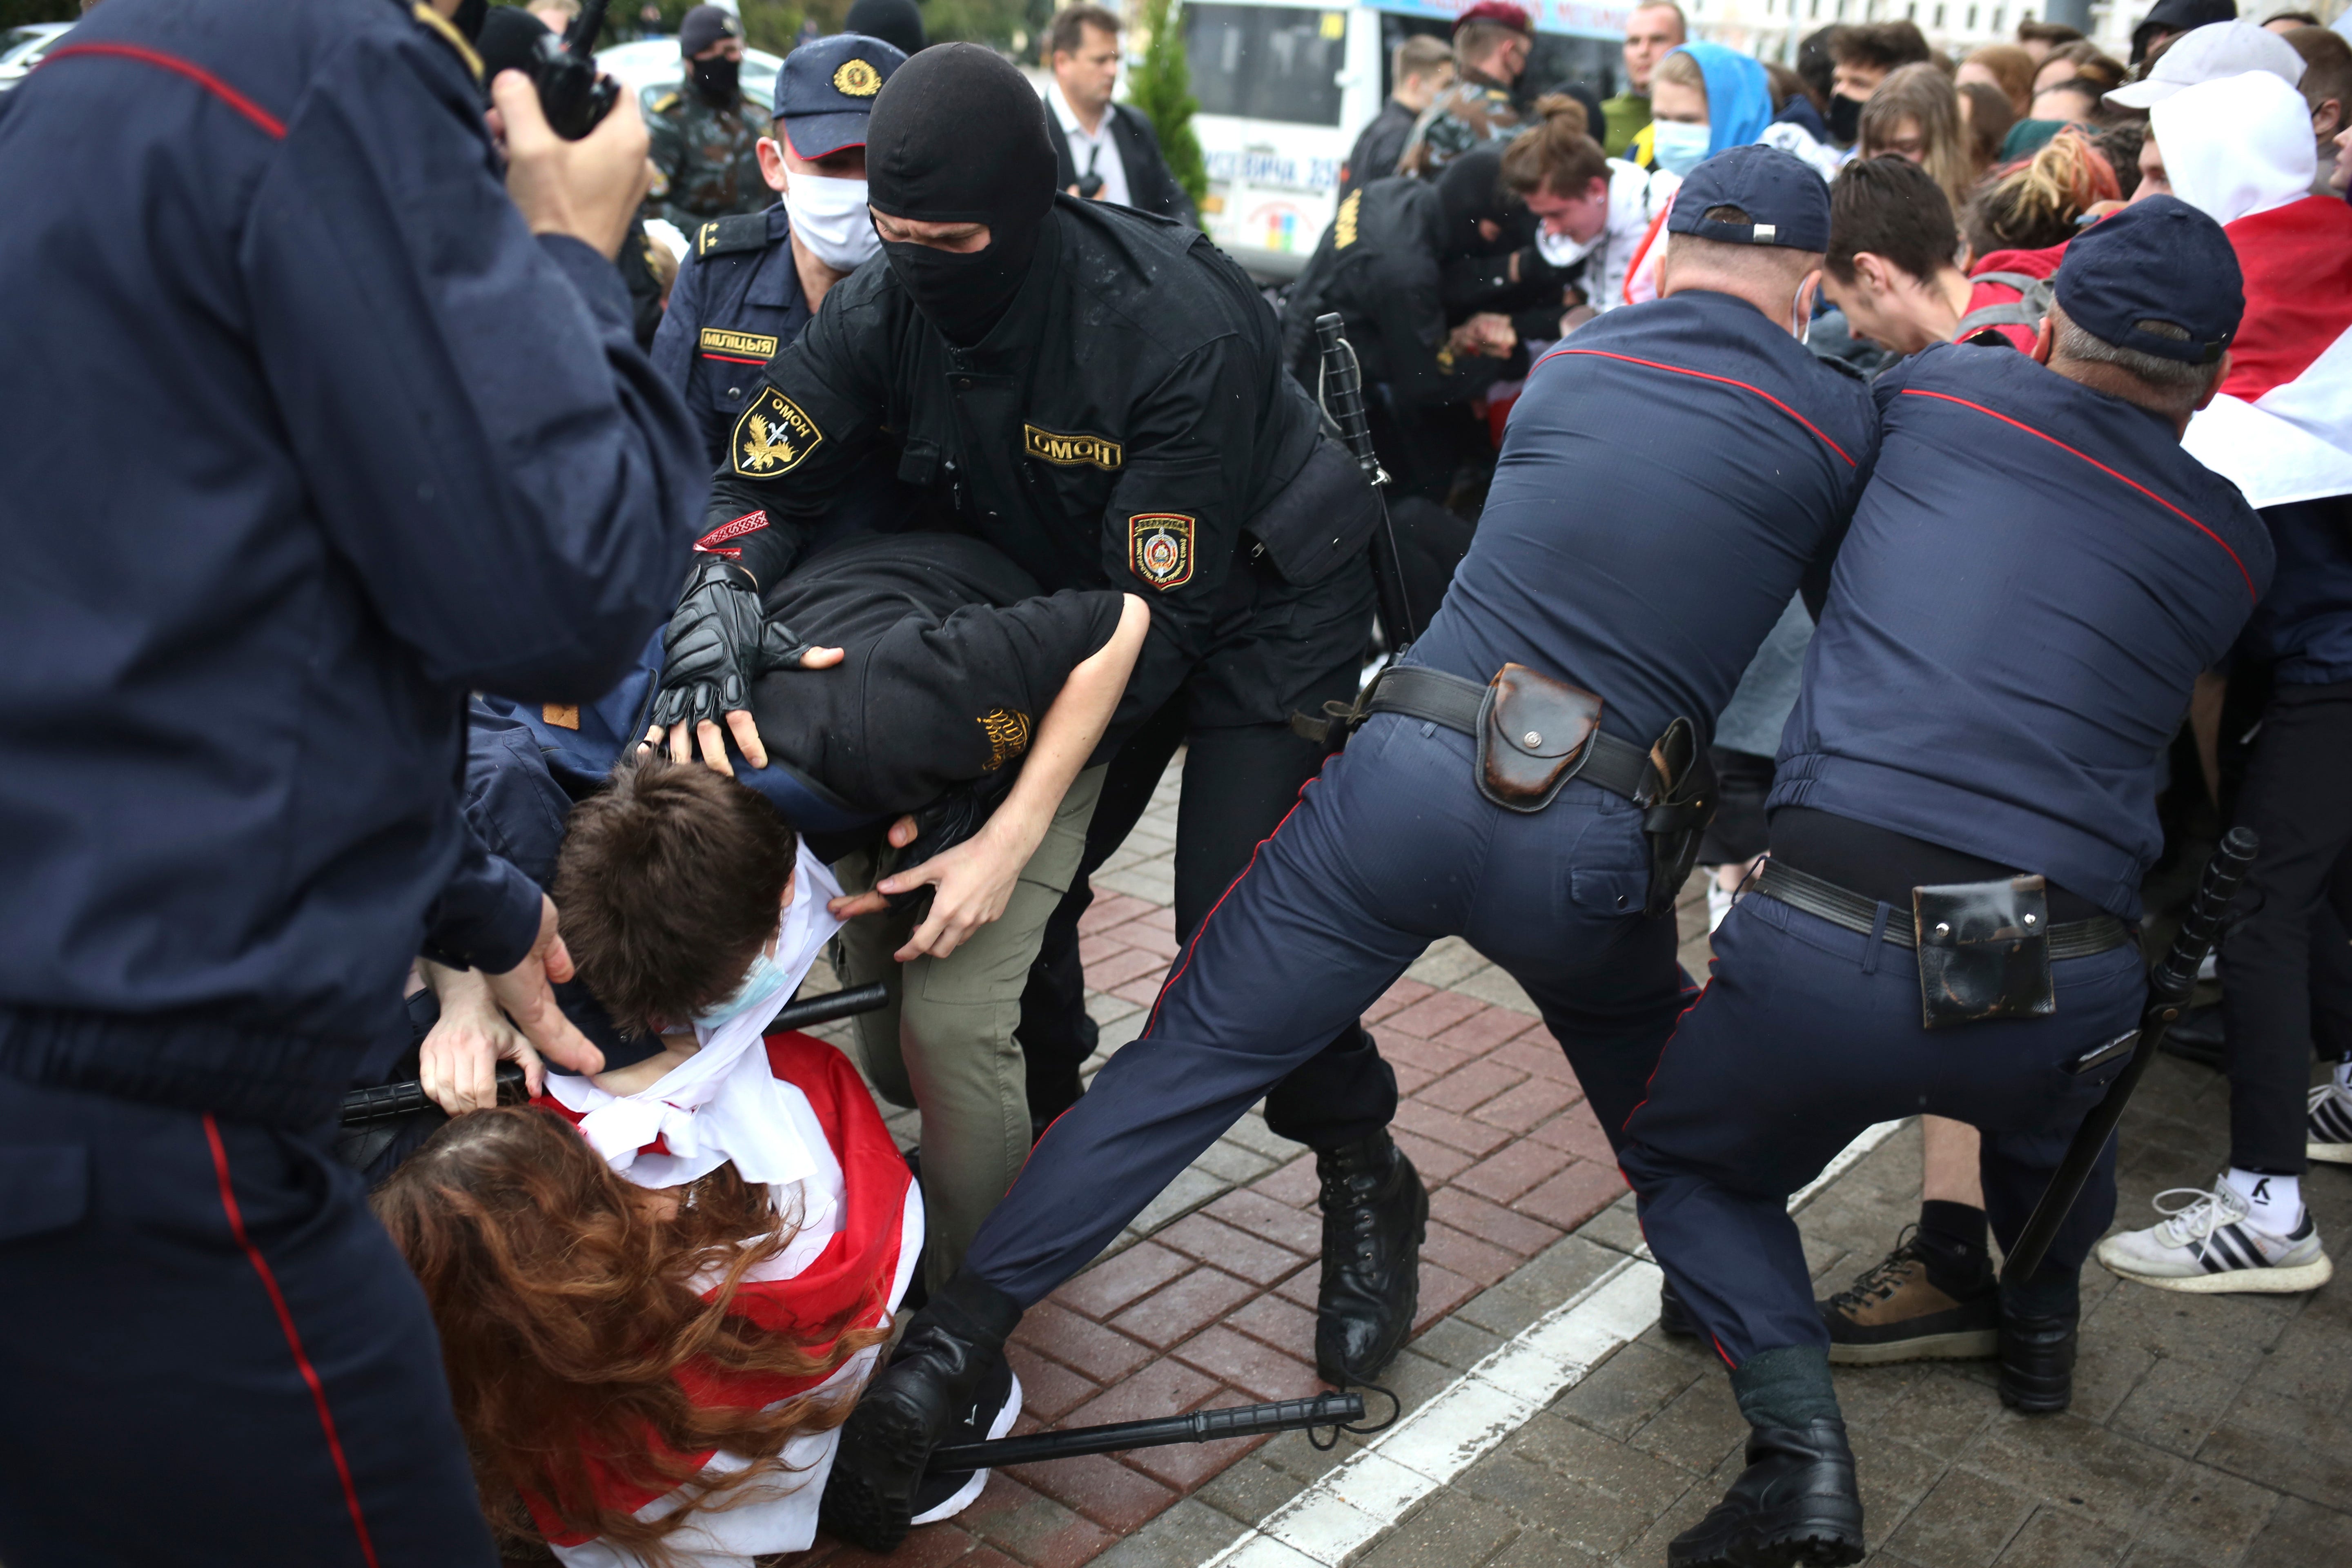 Police detain students during a protest in Minsk, Belarus, on Sept. 1, 2020. Several hundred students gathered in Minsk and marched through the city center, demanding the resignation of the country's authoritarian leader after an election the opposition denounced as rigged. Many have been detained as police moved to break up the crowds.